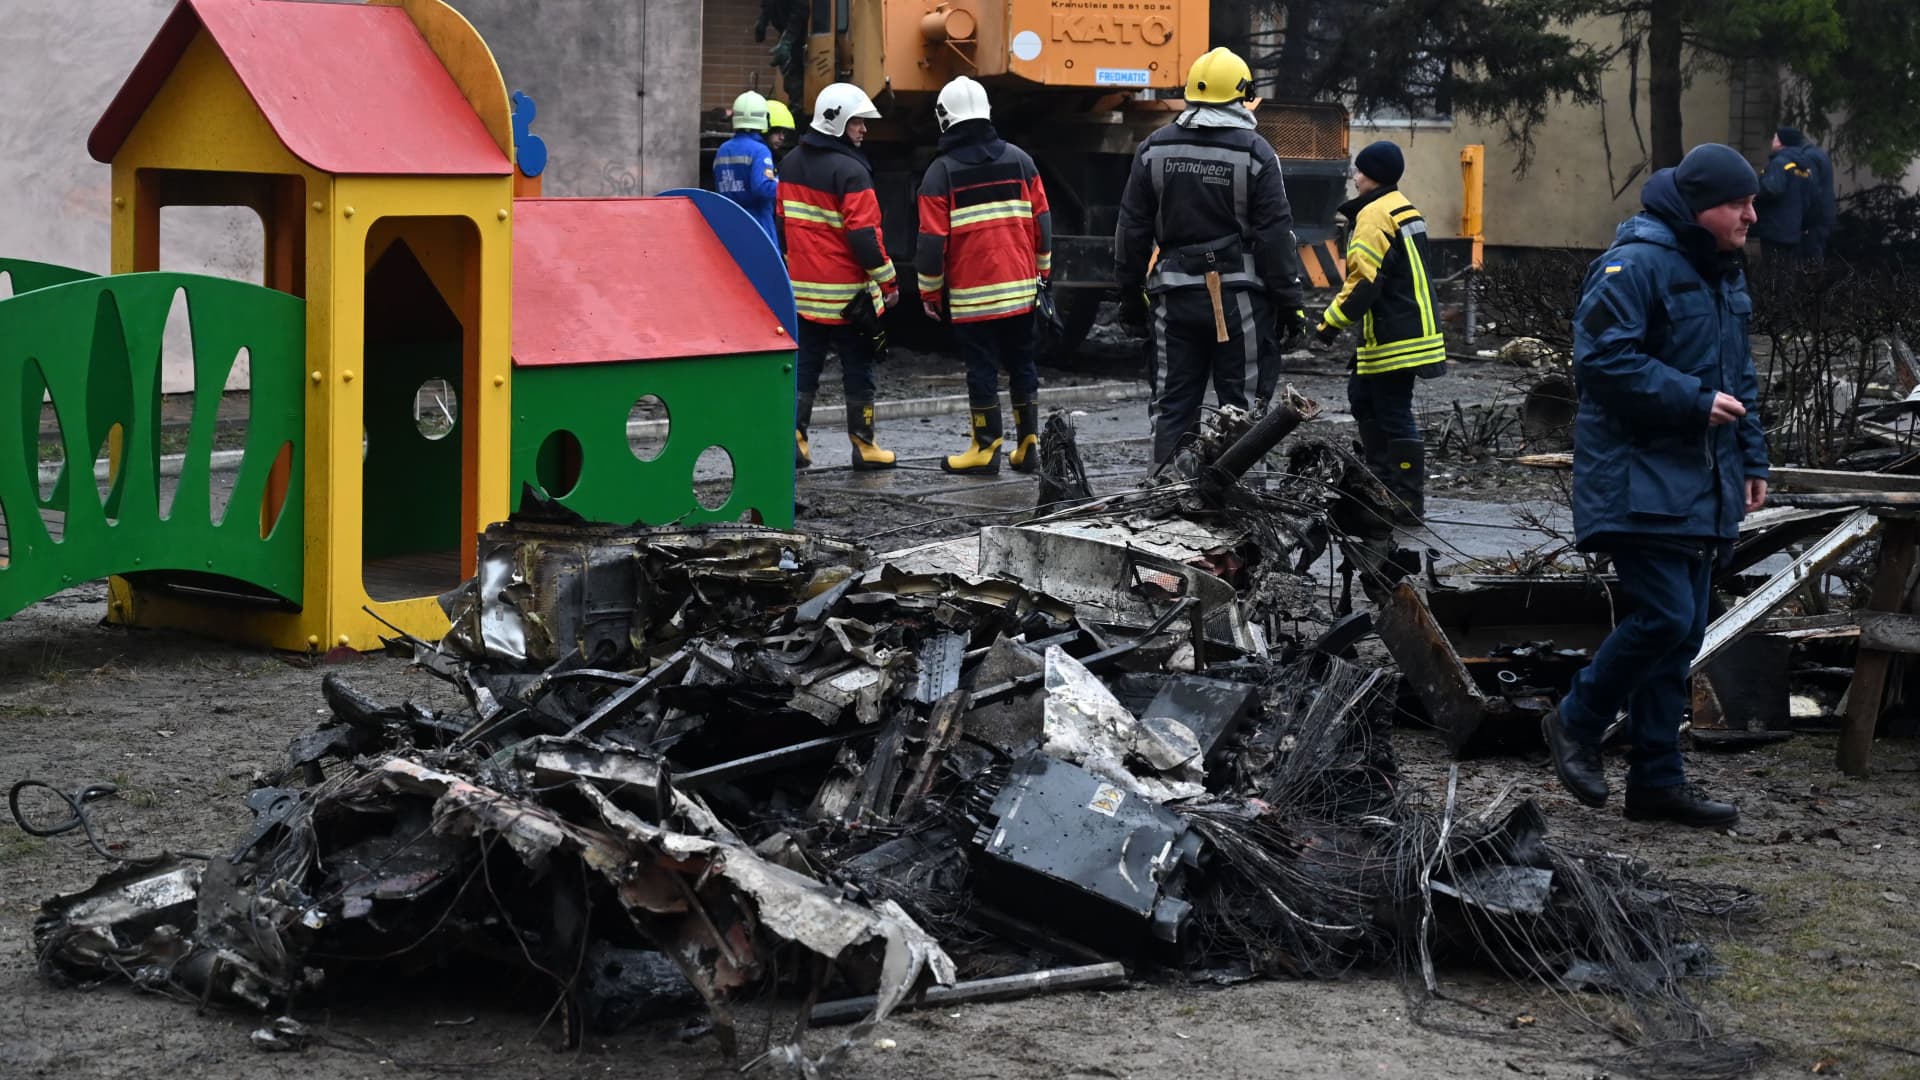 Firefighters work near the site where a helicopter crashed near a kindergarten in Brovary, outside the capital Kyiv.